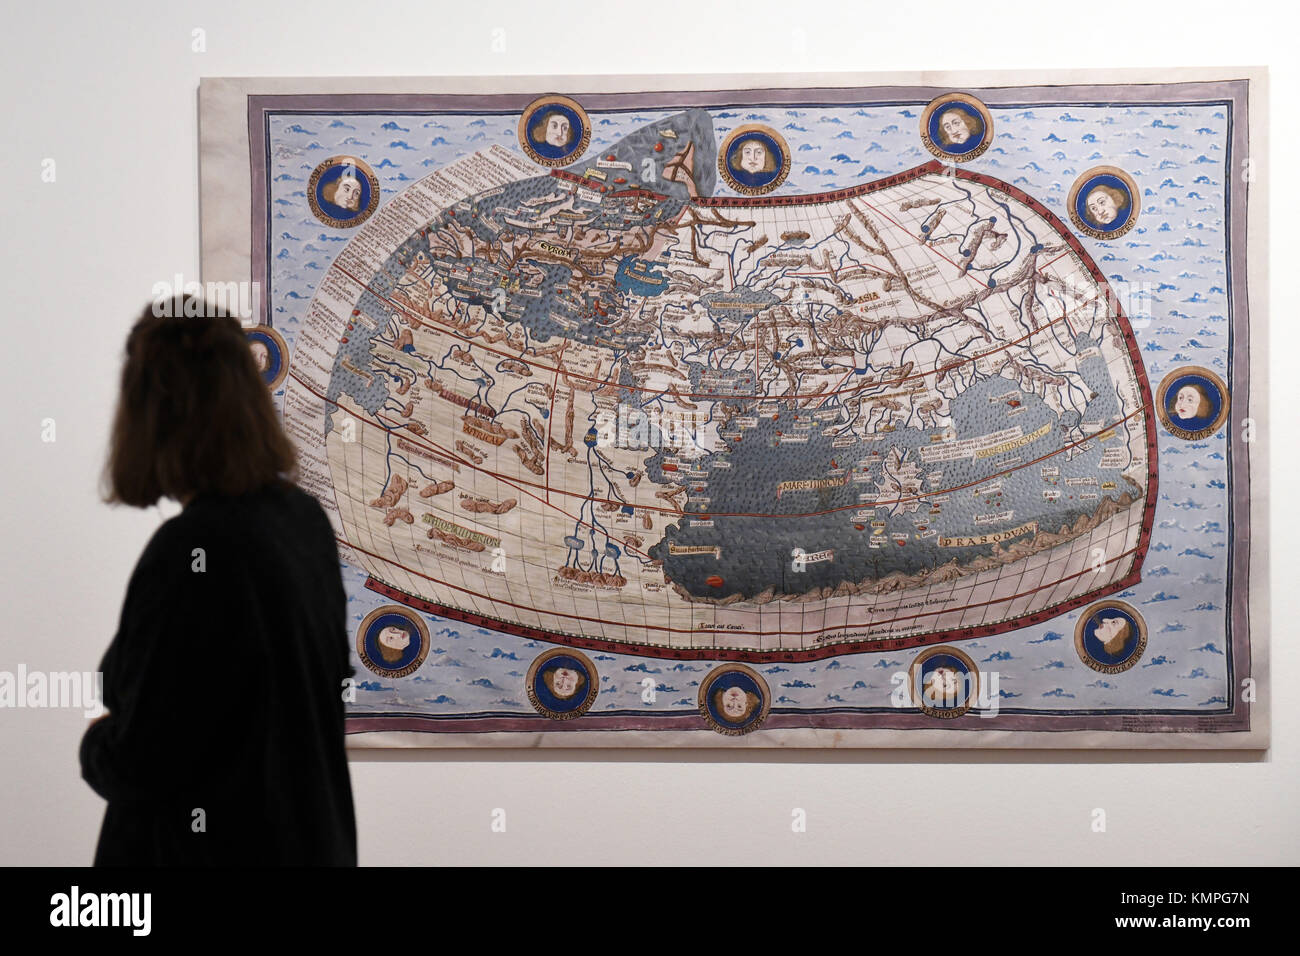 Berlin, Germany. 8th Dec, 2017. A visitor looking at a 1500 world map from Flanders by Johannes de Vico at the exhibition 'Juden, Christen und Muslime im Dialog der Wissenschaften 500-1500' (Jews, Christians and Muslims, Scientific Discourse in the Middle Ages 500-1500) at the Martin-Gropius-Bau in Berlin, Germany, 8 December 2017. The exhibition runs from 9 December 2017 until 4 March 2018. Credit: Maurizio Gambarini/dpa/Alamy Live News Stock Photo